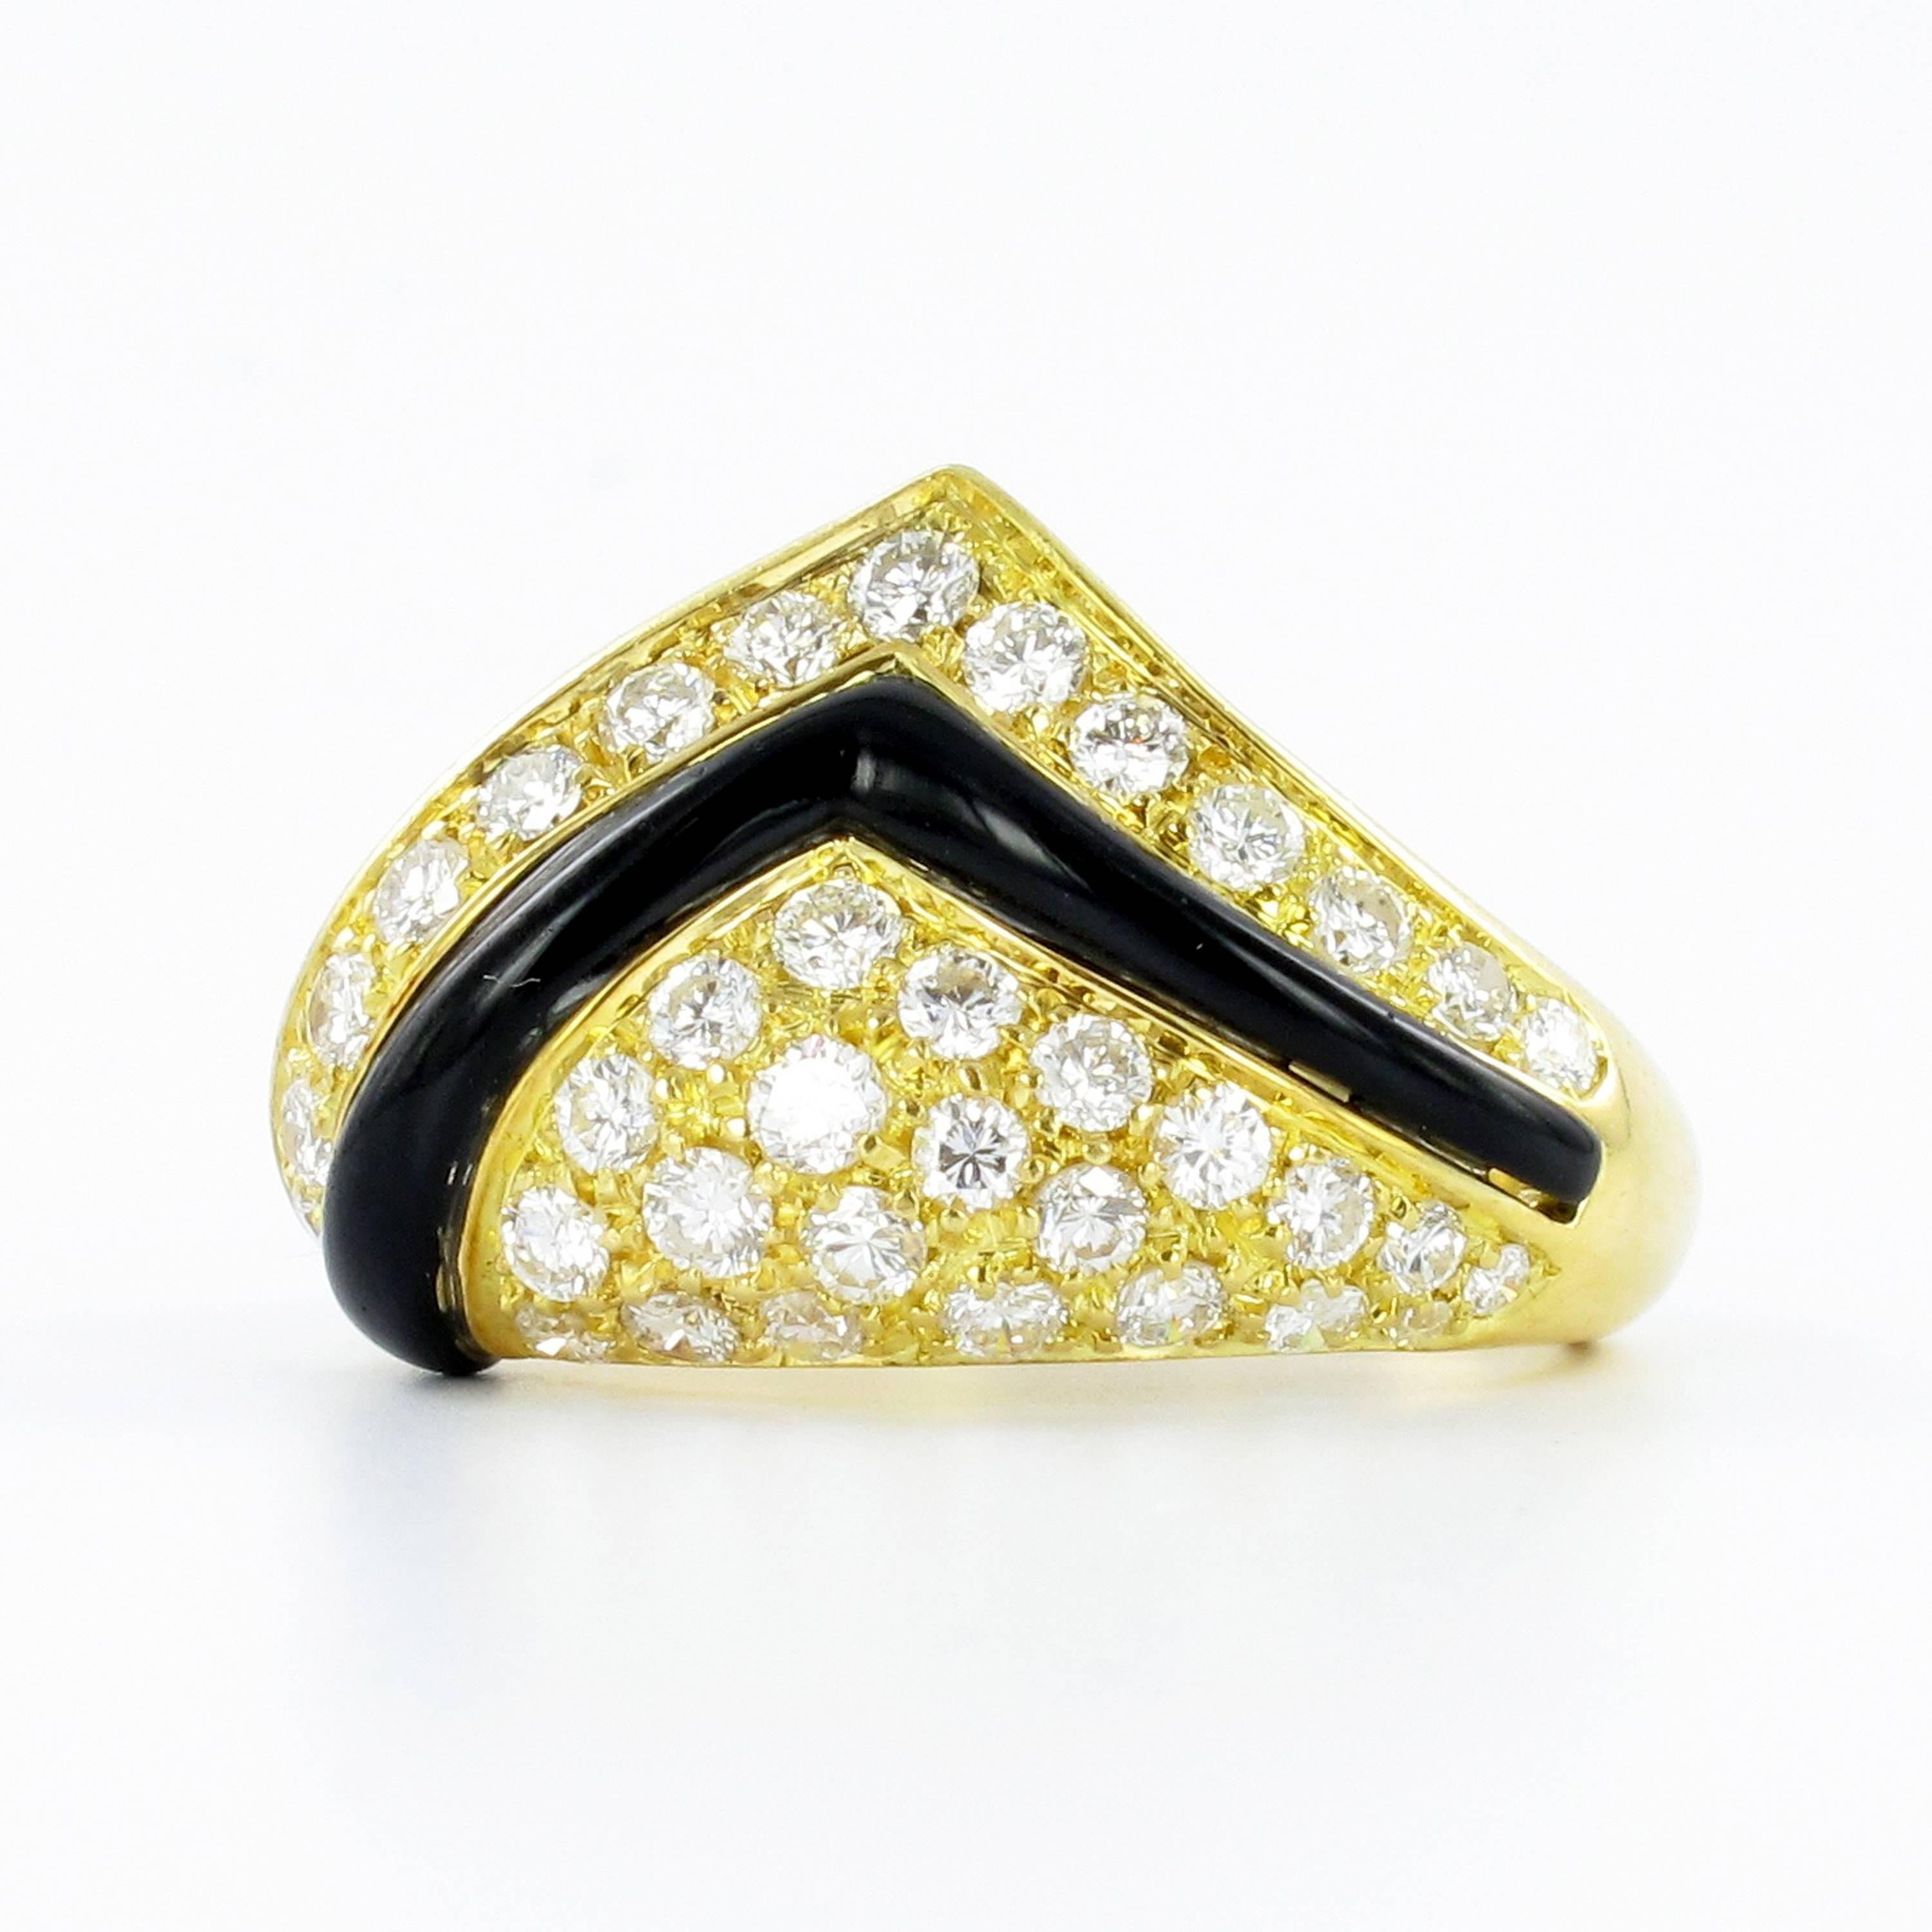 Stylish ring in 18 Karat yellow gold. Set with 68 round brilliant cut diamonds, total estimated weight of 1.93 carats of G/H colour and vs clarity. Accented by one curved black chalcedony element.

Size: 53 (EU) / 6.25 (US)

Italian hallmarks for 18